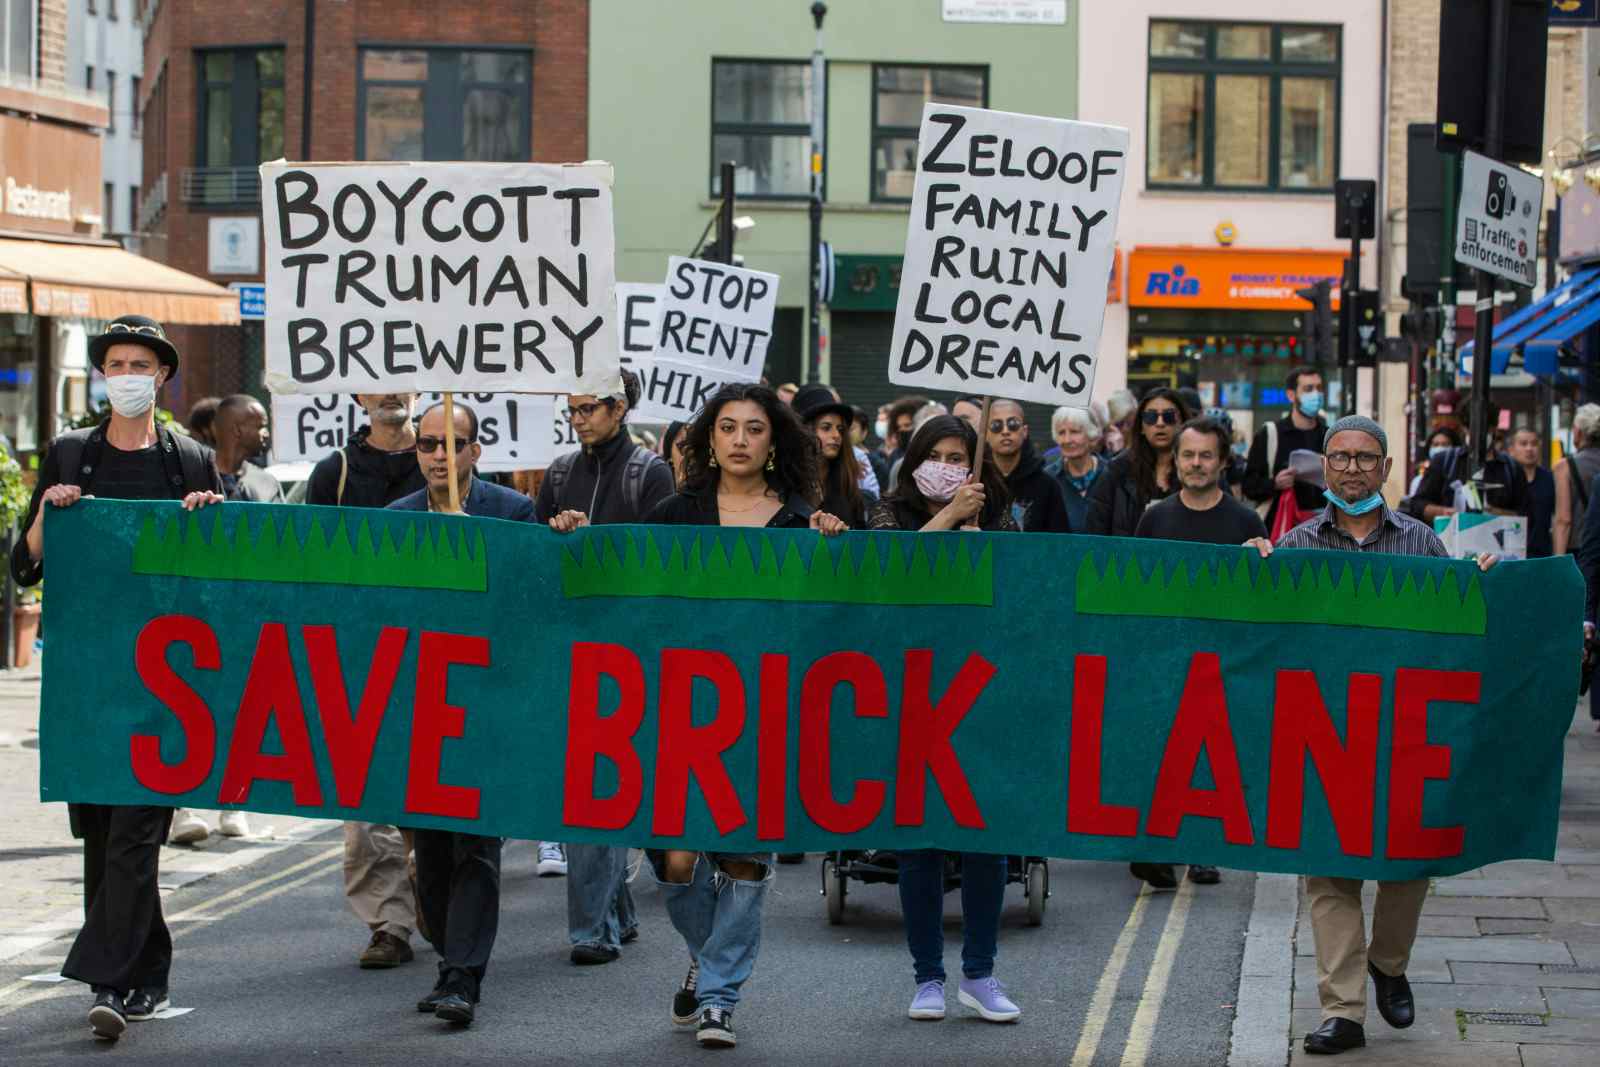 Local residents and supporters of the Save Brick Lane campaign protest against ongoing gentrification on September 12, 2021 in London, U.K. (Mark Kerrison/In Pictures via Getty Images)